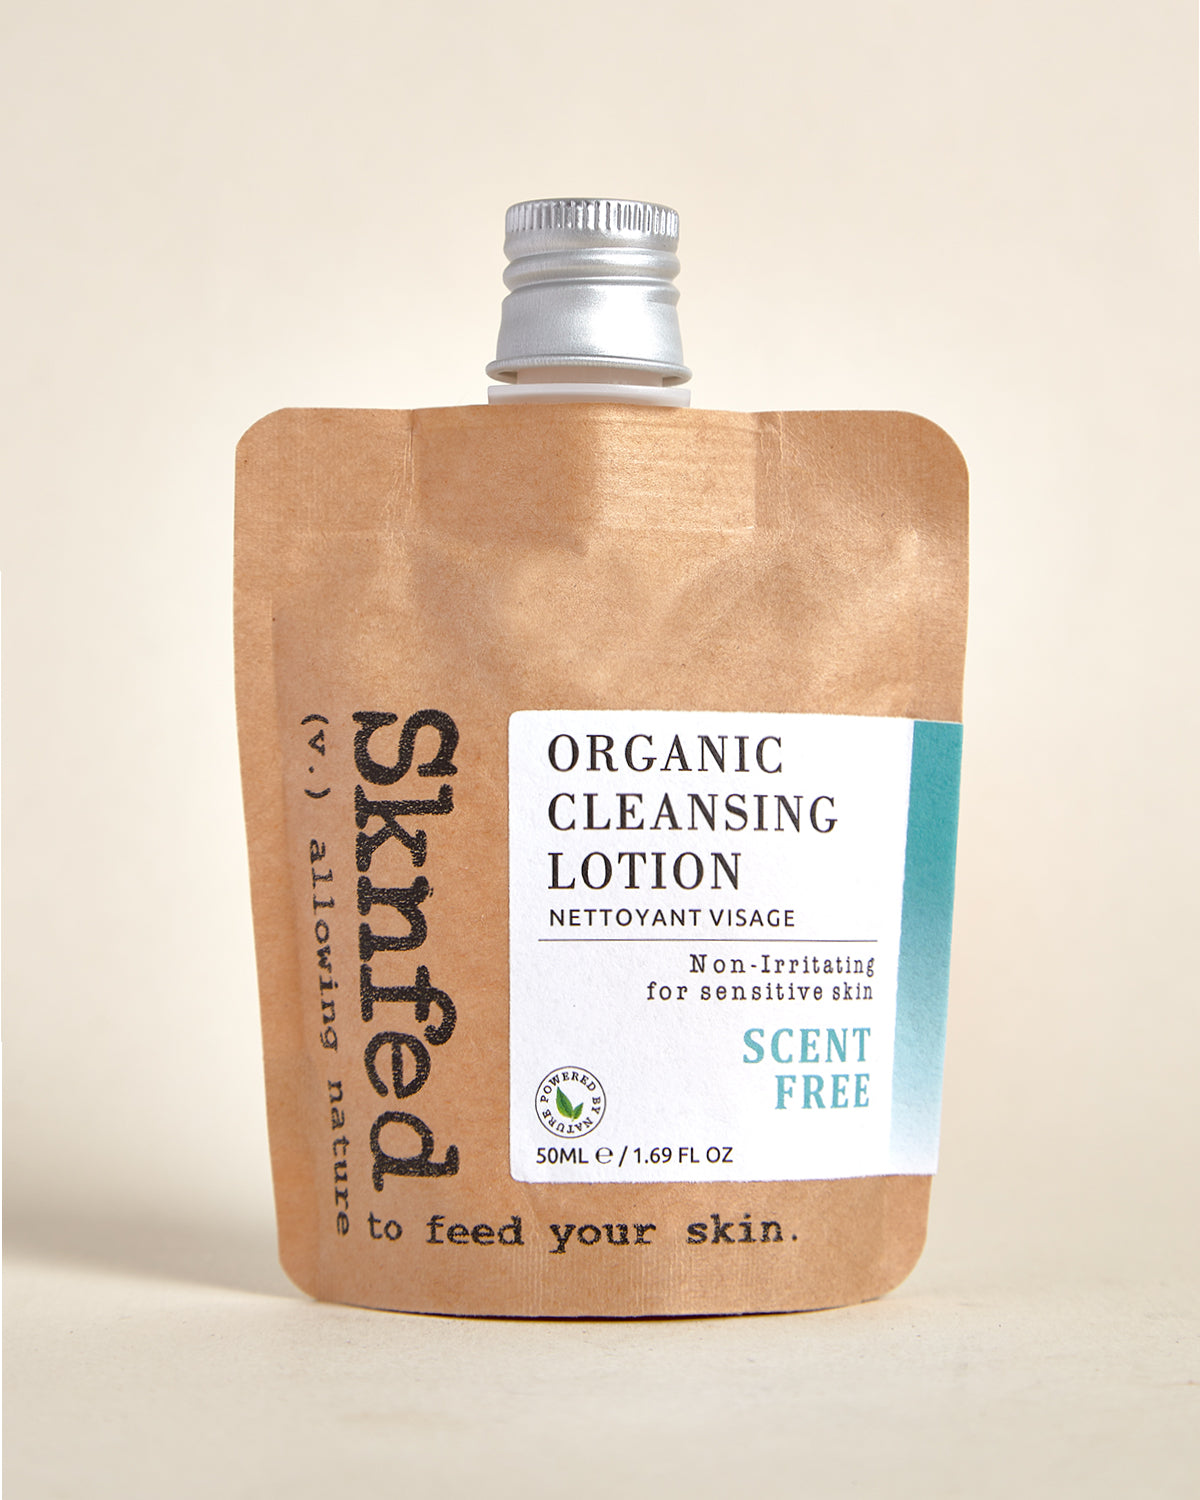 ORGANIC CLEANSING LOTION